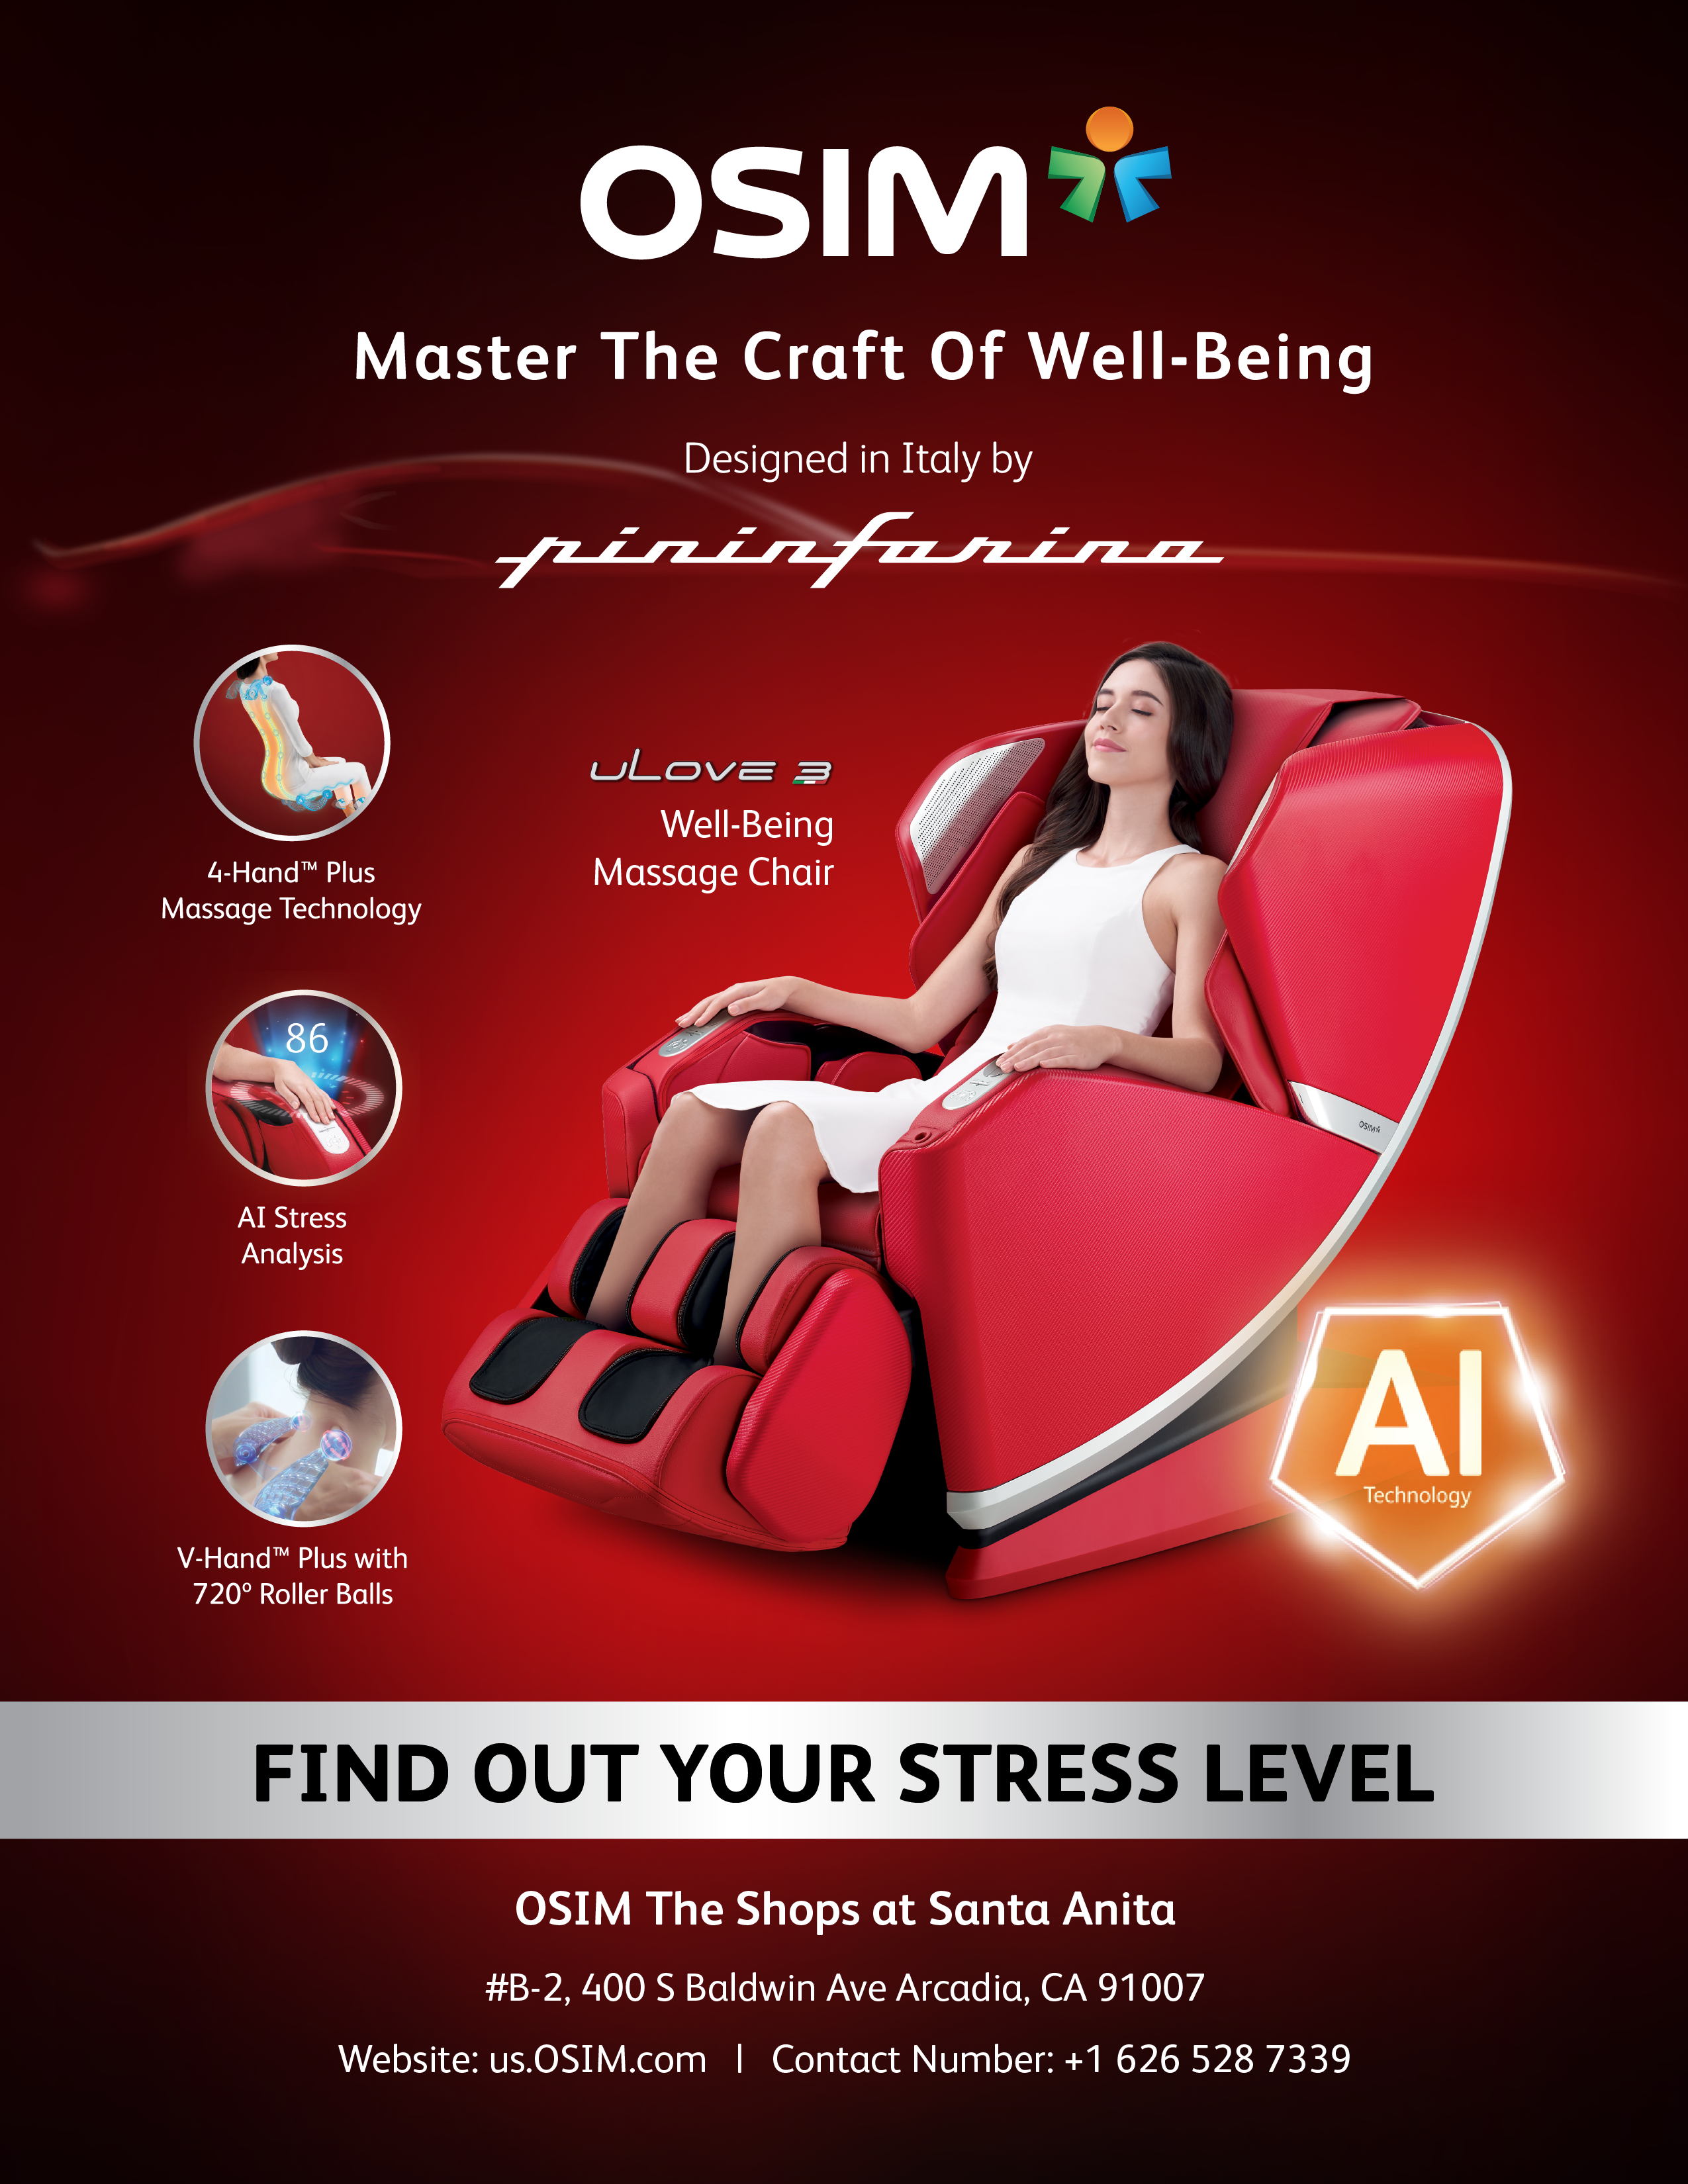 OSIM intro flyer showing woman relaxing in a massage chair 